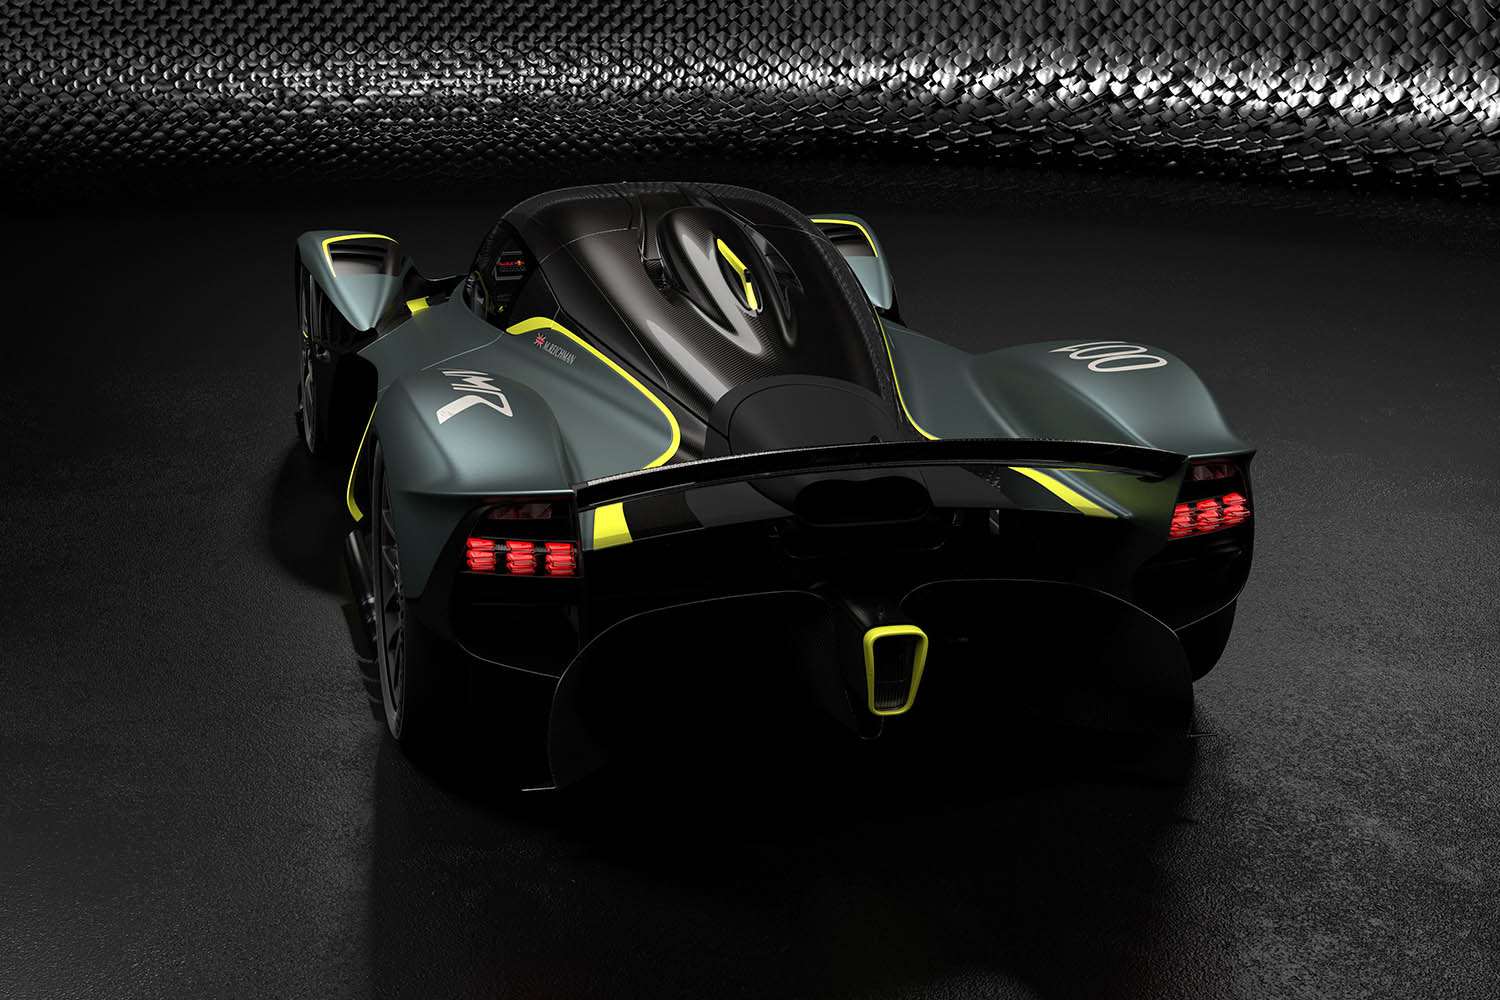 Aston Martin Valkyrie with AMR Track Performance Pack - Stirling Green and Lime livery (2).jpg